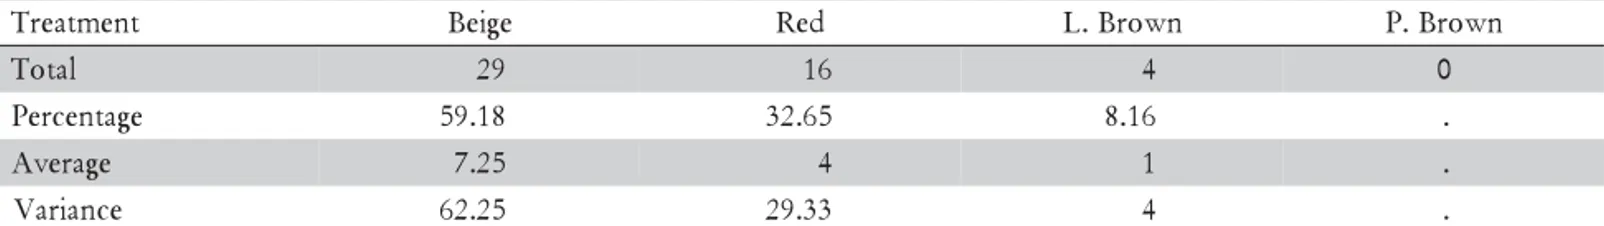 Table 7 - Seed consumption among the beige, red, camouflaged with liquid and camouflaged with powder treatments in wheat planting experiment 3